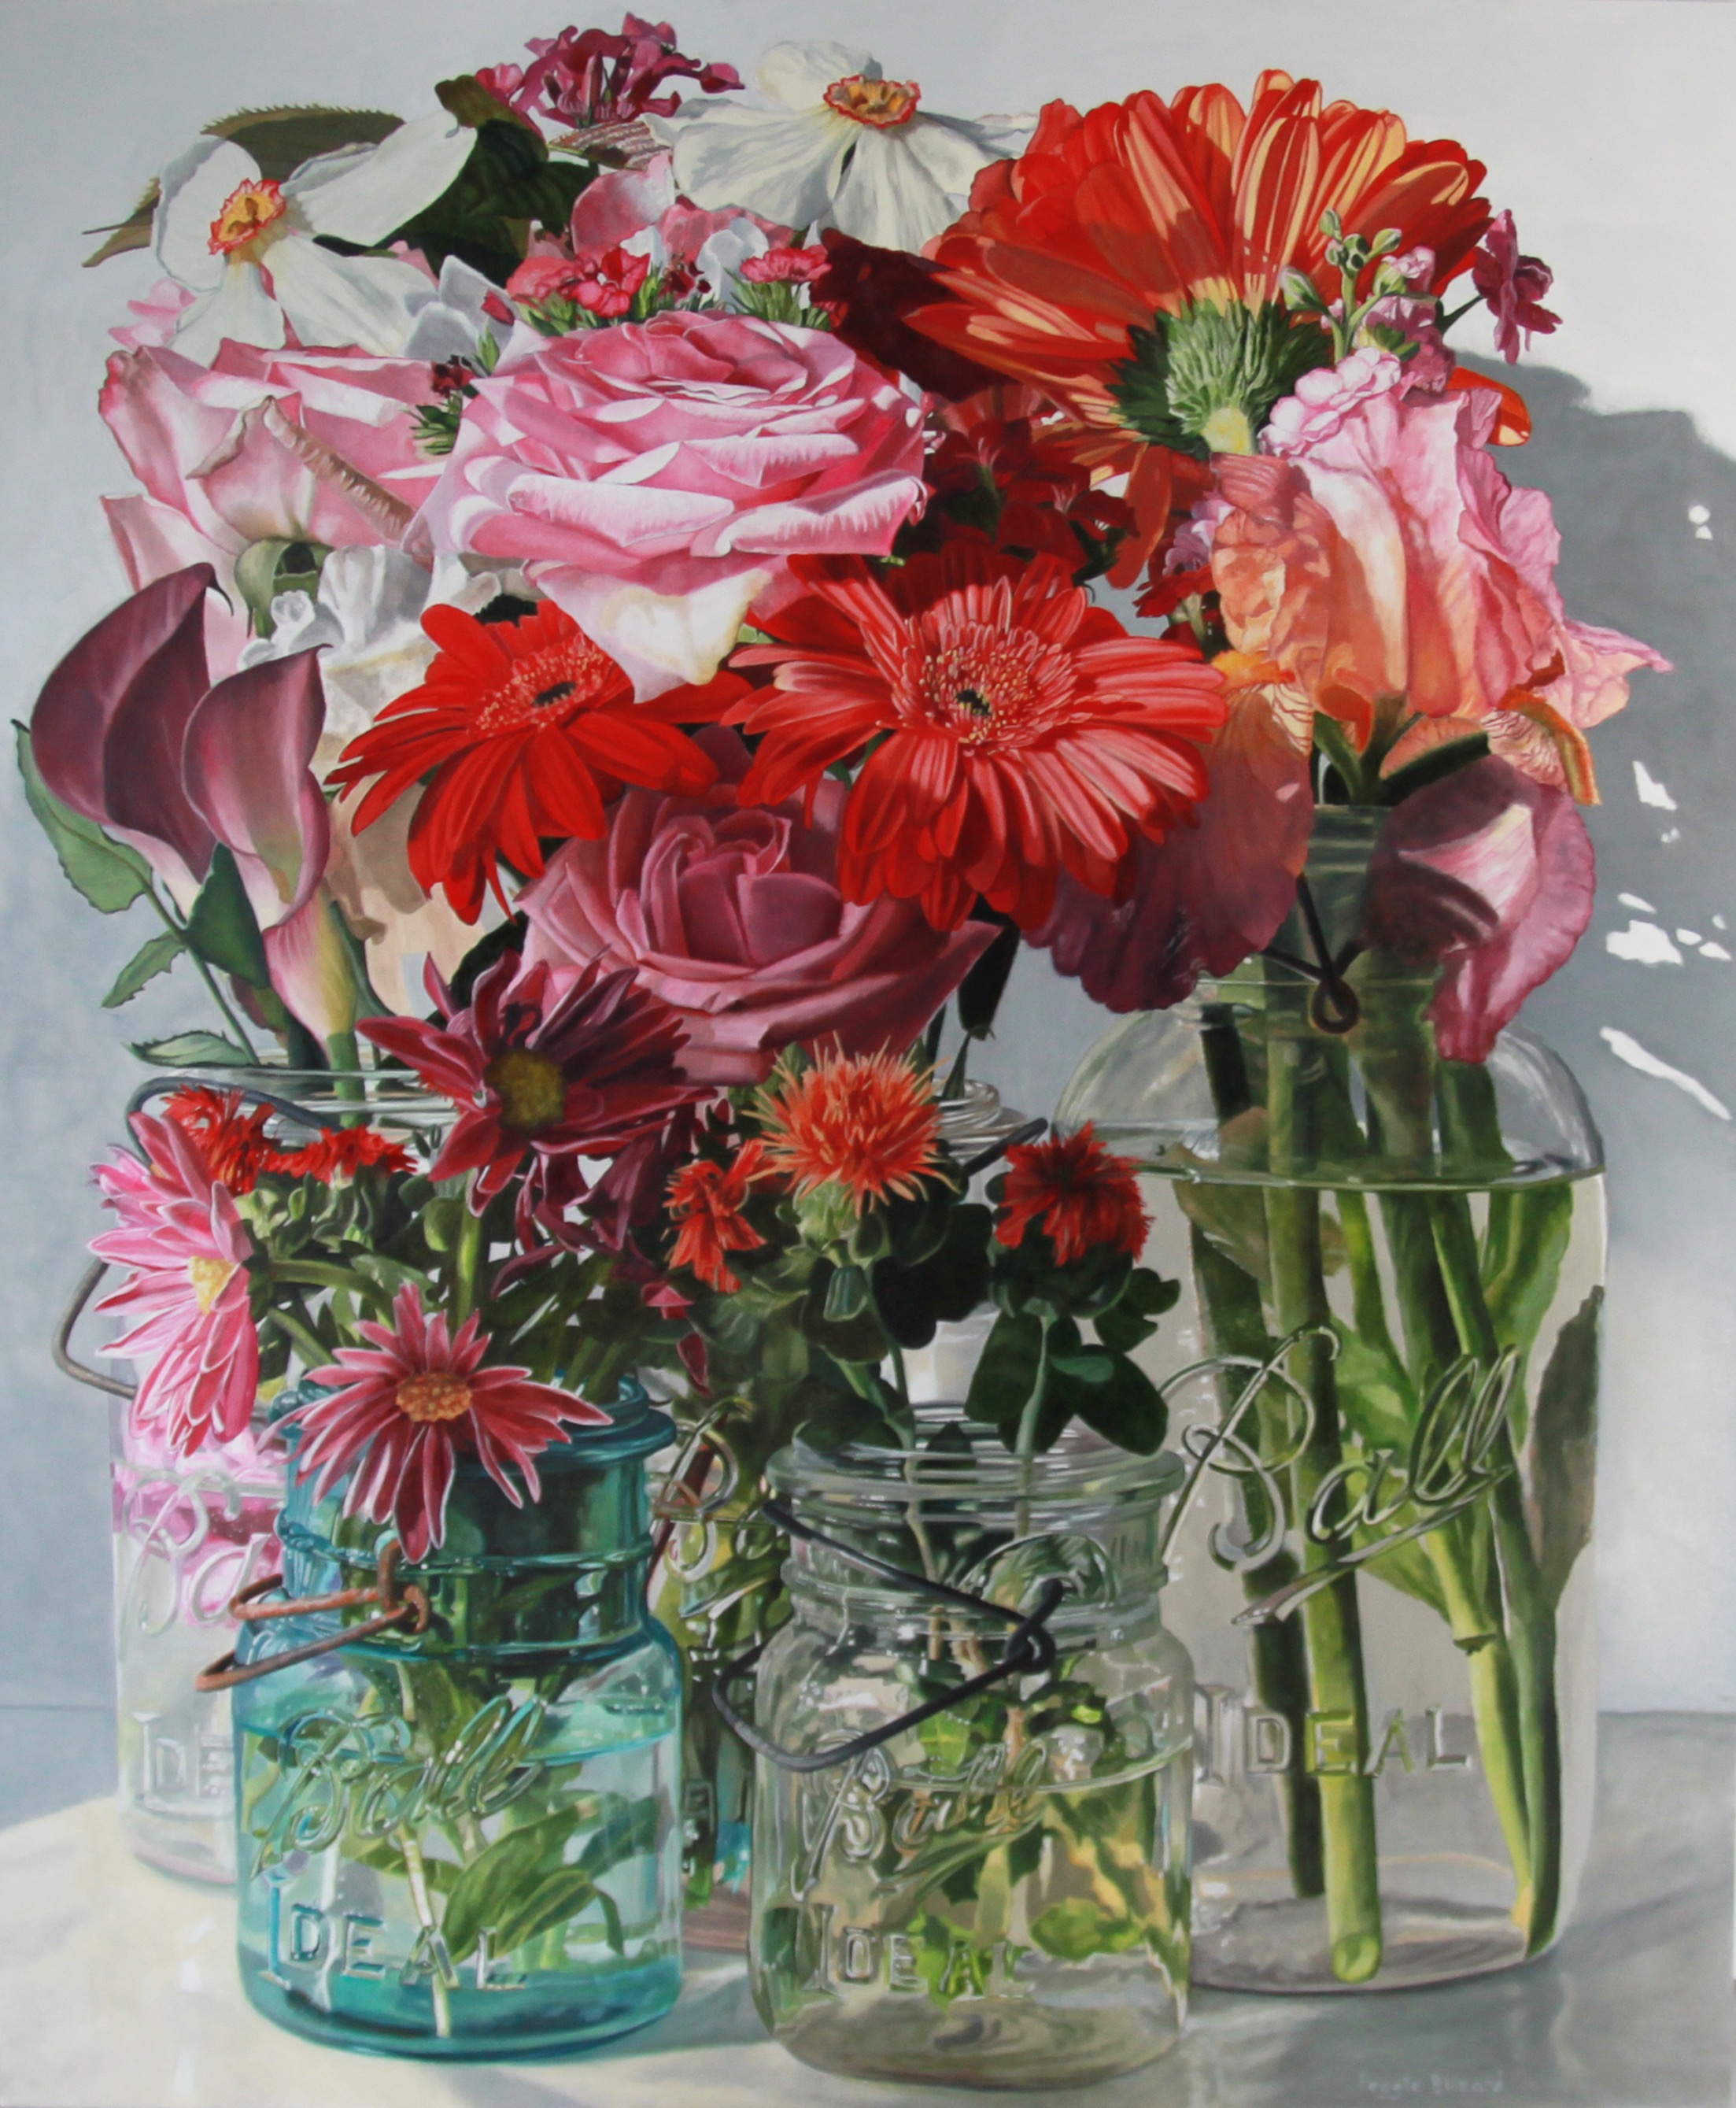 Peggie Blizard, Five Ball Jars with Flowers, oil on panel, 36x30", $10,000.